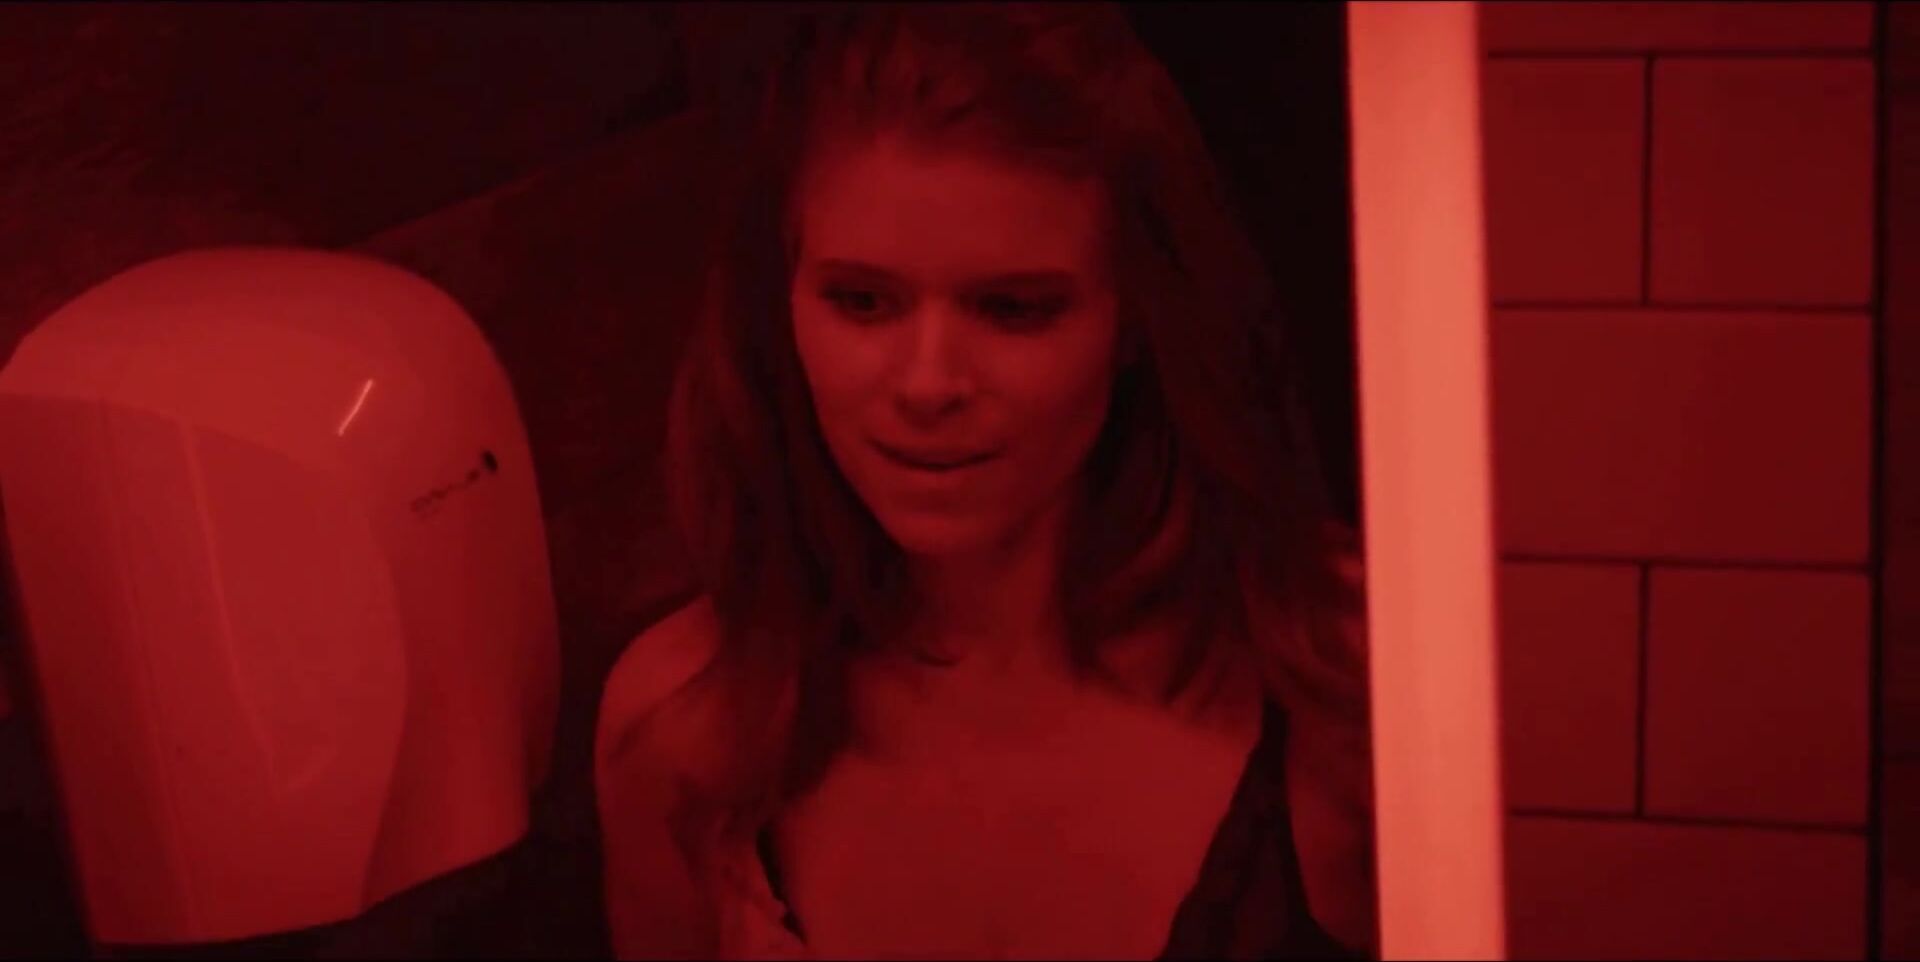 IndianXtube Teacher Sex celebrity blowjob scene of Kate Mara turns into vaginal sex in the end Tinytits